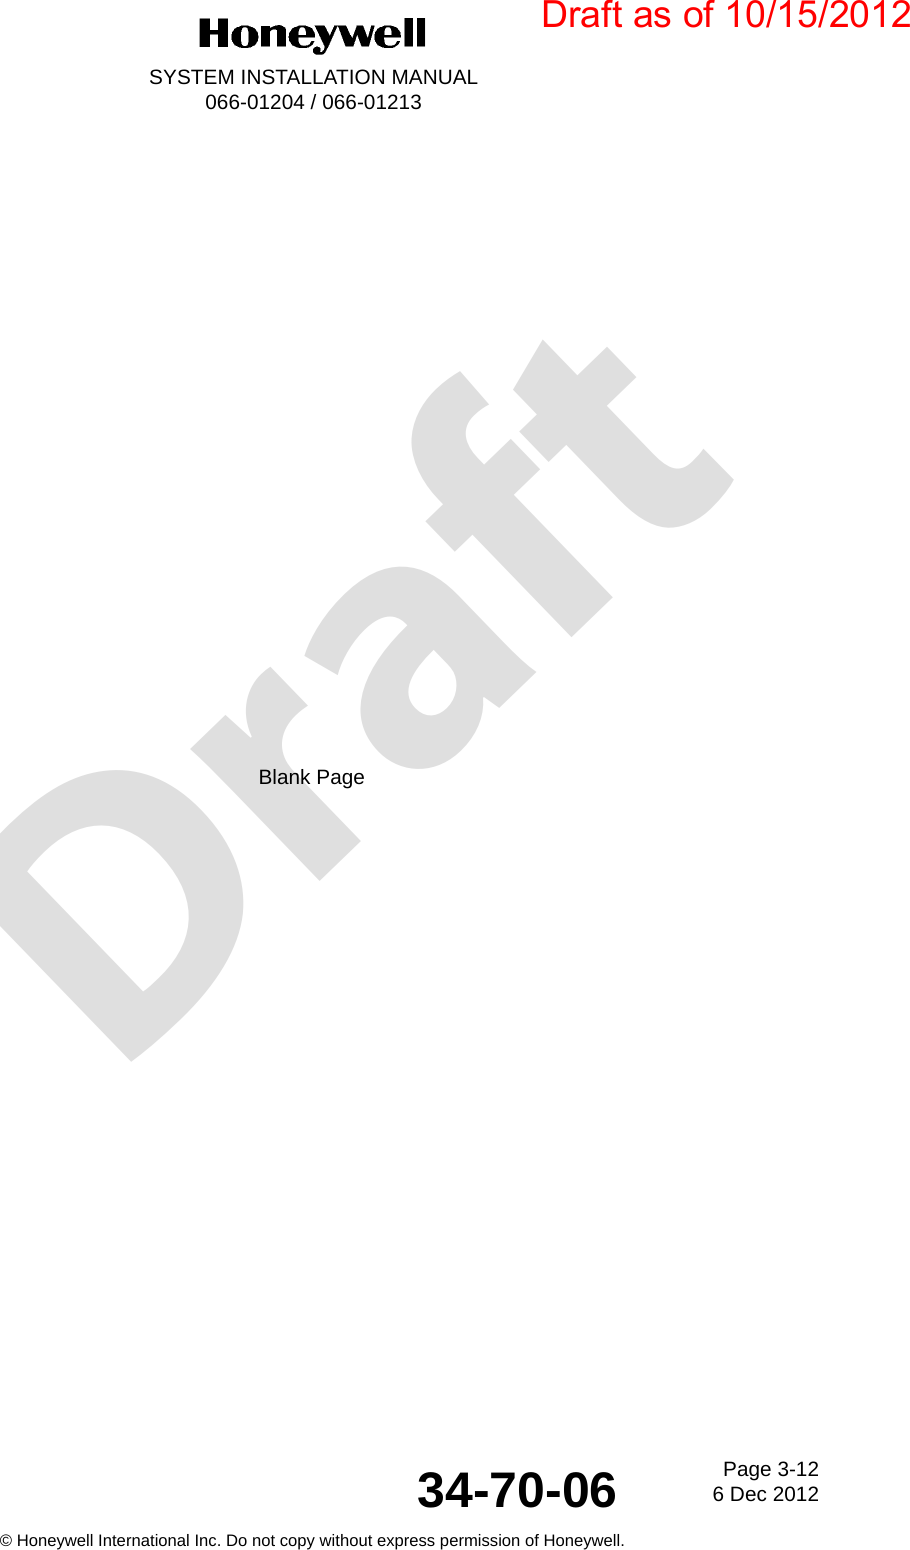 DraftPage 3-126 Dec 201234-70-06SYSTEM INSTALLATION MANUAL066-01204 / 066-01213© Honeywell International Inc. Do not copy without express permission of Honeywell.Blank PageDraft as of 10/15/2012